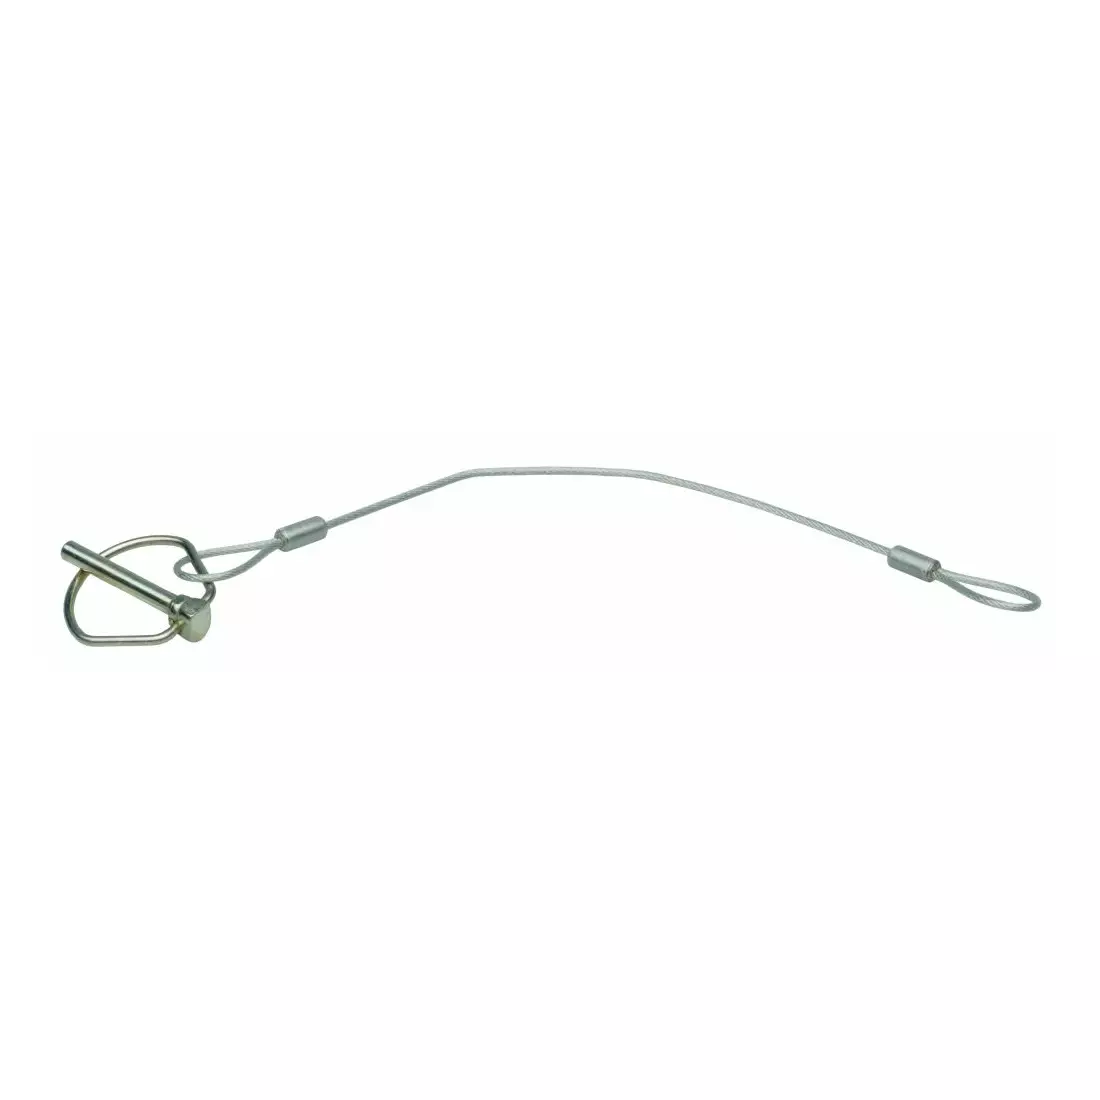 FOLLOWME safety pin with cord silver FM-152.200